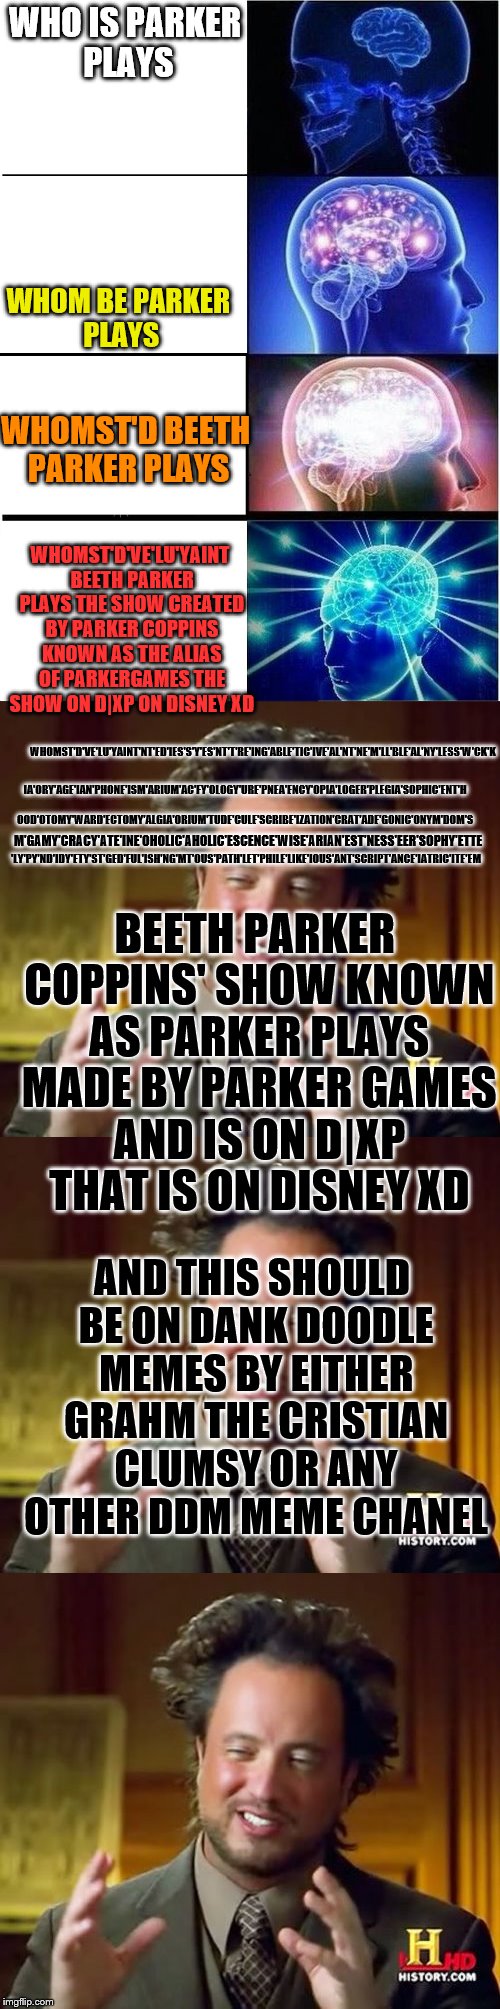 WHO IS PARKER PLAYS; WHOM BE PARKER PLAYS; WHOMST'D BEETH PARKER PLAYS; WHOMST'D'VE'LU'YAINT BEETH PARKER PLAYS THE SHOW CREATED BY PARKER COPPINS KNOWN AS THE ALIAS OF PARKERGAMES THE SHOW ON D|XP ON DISNEY XD; WHOMST'D'VE'LU'YAINT'NT'ED'IES'S'Y'ES'NT'T'RE'ING'ABLE'TIC'IVE'AL'NT'NE'M'LL'BLE'AL'NY'LESS'W'CK'K; IA'ORY'AGE'IAN'PHONE'ISM'ARIUM'AC'FY'OLOGY'URE'PNEA'ENCY'OPIA'LOGER'PLEGIA'SOPHIC'ENT'H; OOD'OTOMY'WARD'ECTOMY'ALGIA'ORIUM'TUDE'CULE'SCRIBE'IZATION'CRAT'ADE'GONIC'ONYM'DOM'S; M'GAMY'CRACY'ATE'INE'OHOLIC'AHOLIC'ESCENCE'WISE'ARIAN'EST'NESS'EER'SOPHY'ETTE; 'LY'PY'ND'IDY'ETY'ST'GED'FUL'ISH'NG'MT'OUS'PATH'LET'PHILE'LIKE'IOUS'ANT'SCRIPT'ANCE'IATRIC'ITE'EM; BEETH PARKER COPPINS' SHOW KNOWN AS PARKER PLAYS MADE BY PARKER GAMES AND IS ON D|XP THAT IS ON DISNEY XD; AND THIS SHOULD BE ON DANK DOODLE MEMES BY EITHER GRAHM THE CRISTIAN CLUMSY OR ANY OTHER DDM MEME CHANEL | image tagged in parker plays,expanding brain,graham the cristian,clumsy,patoeateos | made w/ Imgflip meme maker